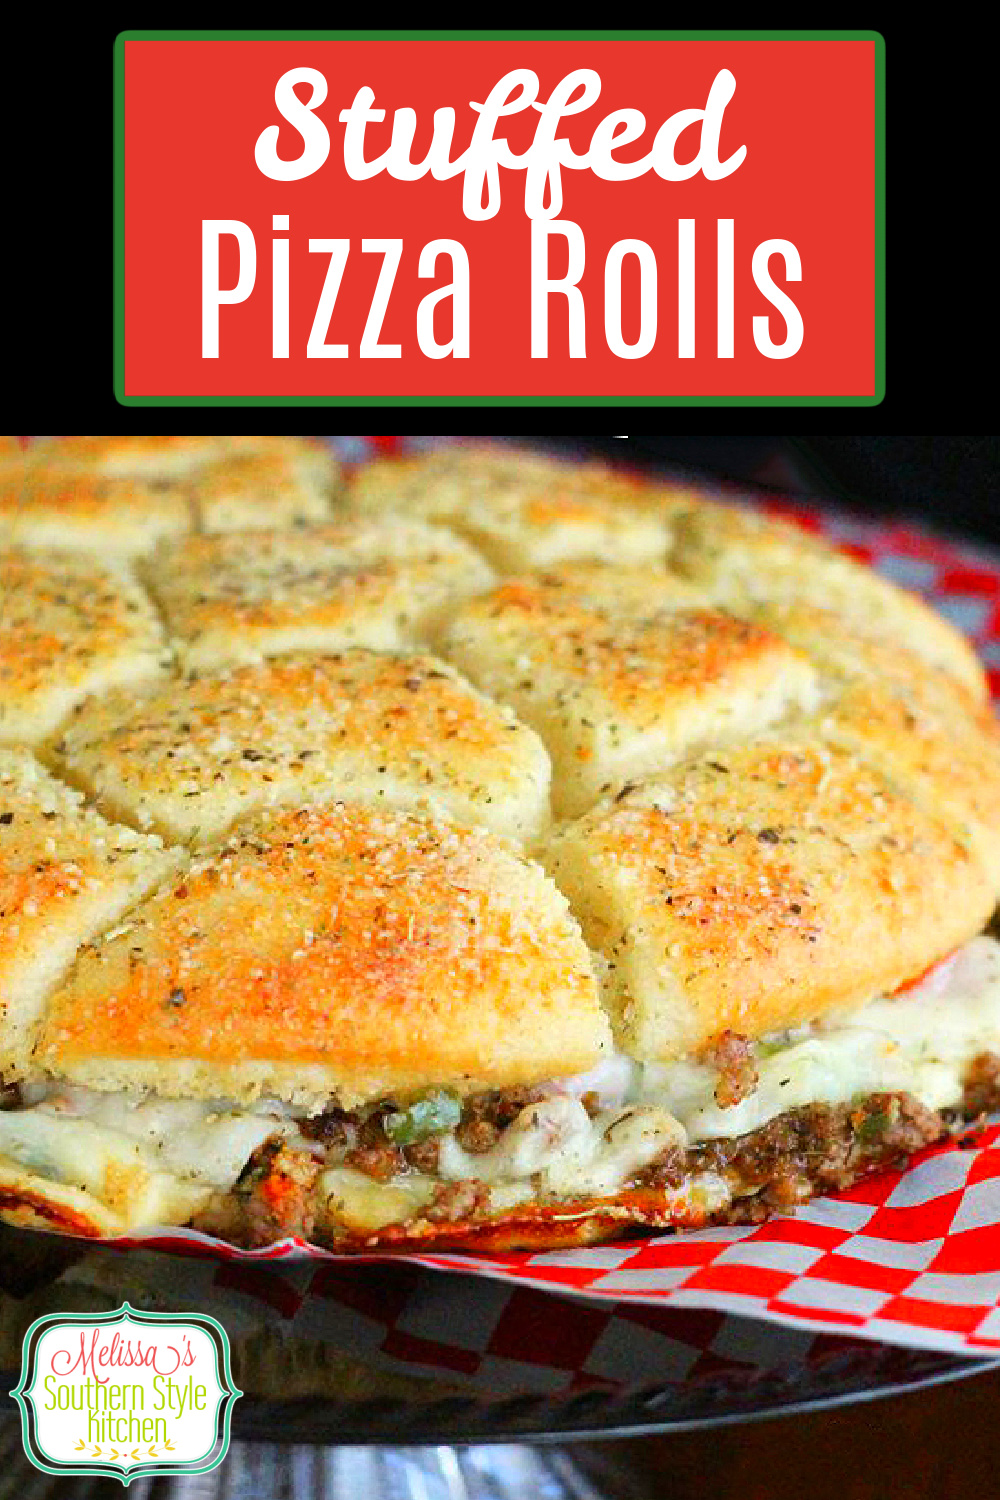 Pull apart and enjoy these shareable ooey gooey Supreme Pizza Rolls #pizza #pizzarolls #snacks #appetizers #rolls #supremepizza #pizzarecipes #southernrecipes #gamedayrecipes #footballfood